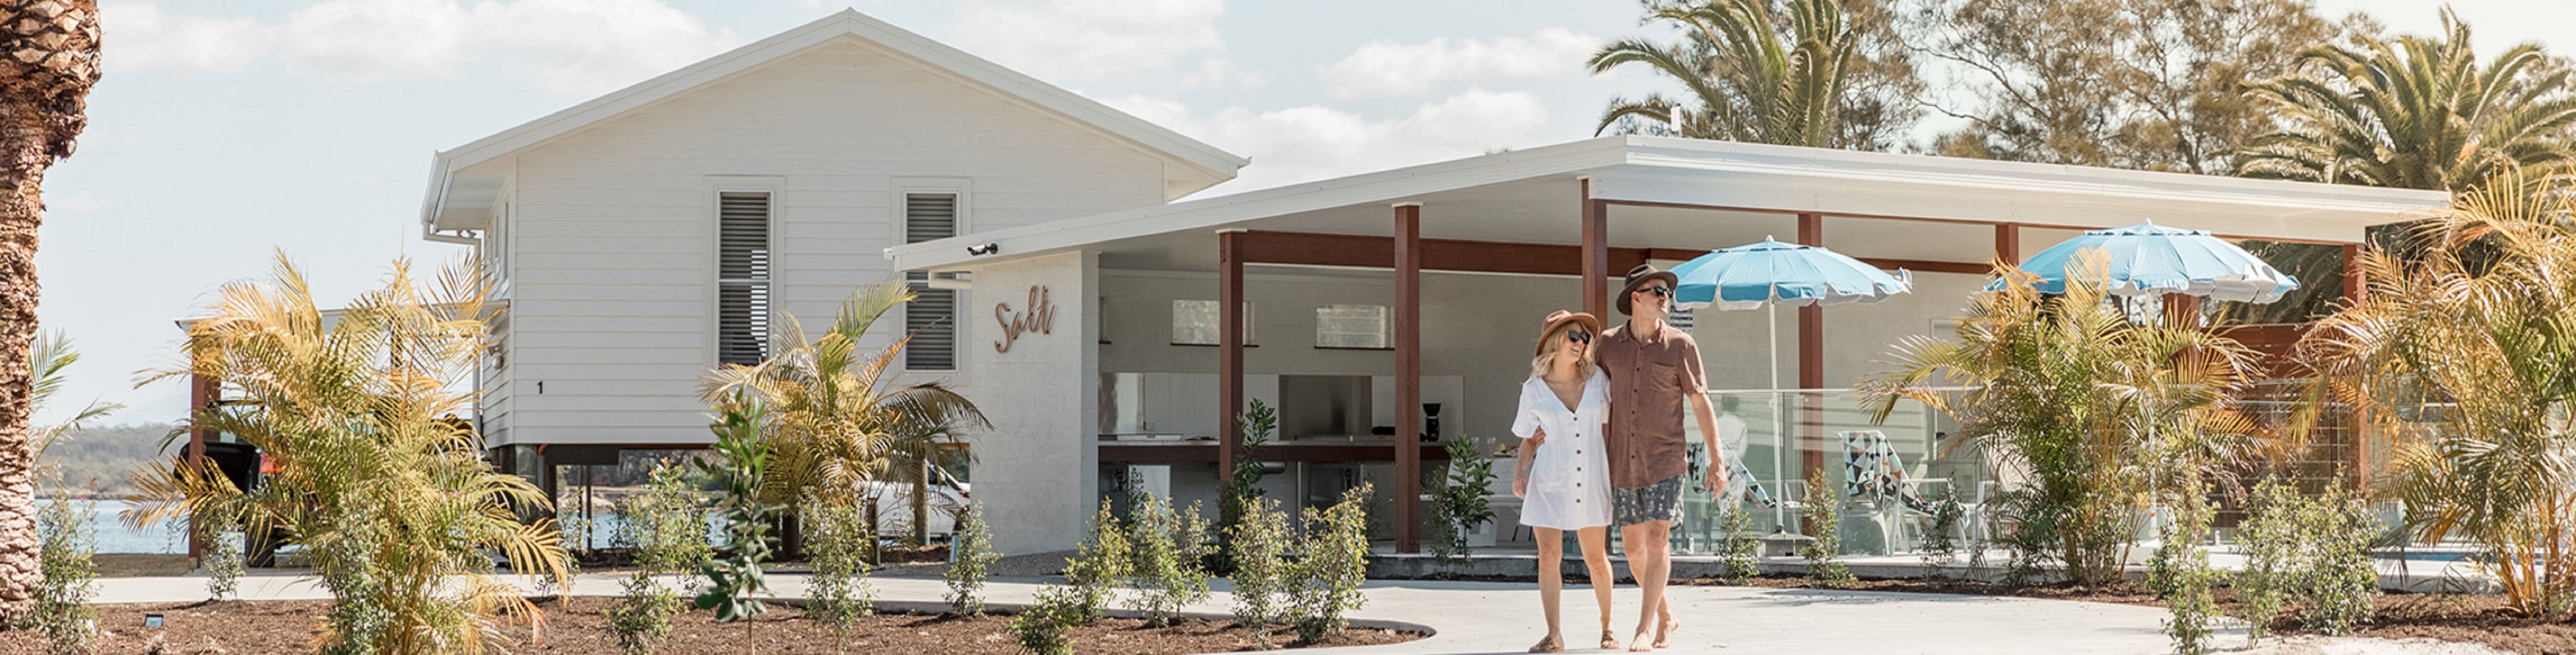 Salt at South West Rocks - Accommodation Airlie Beach